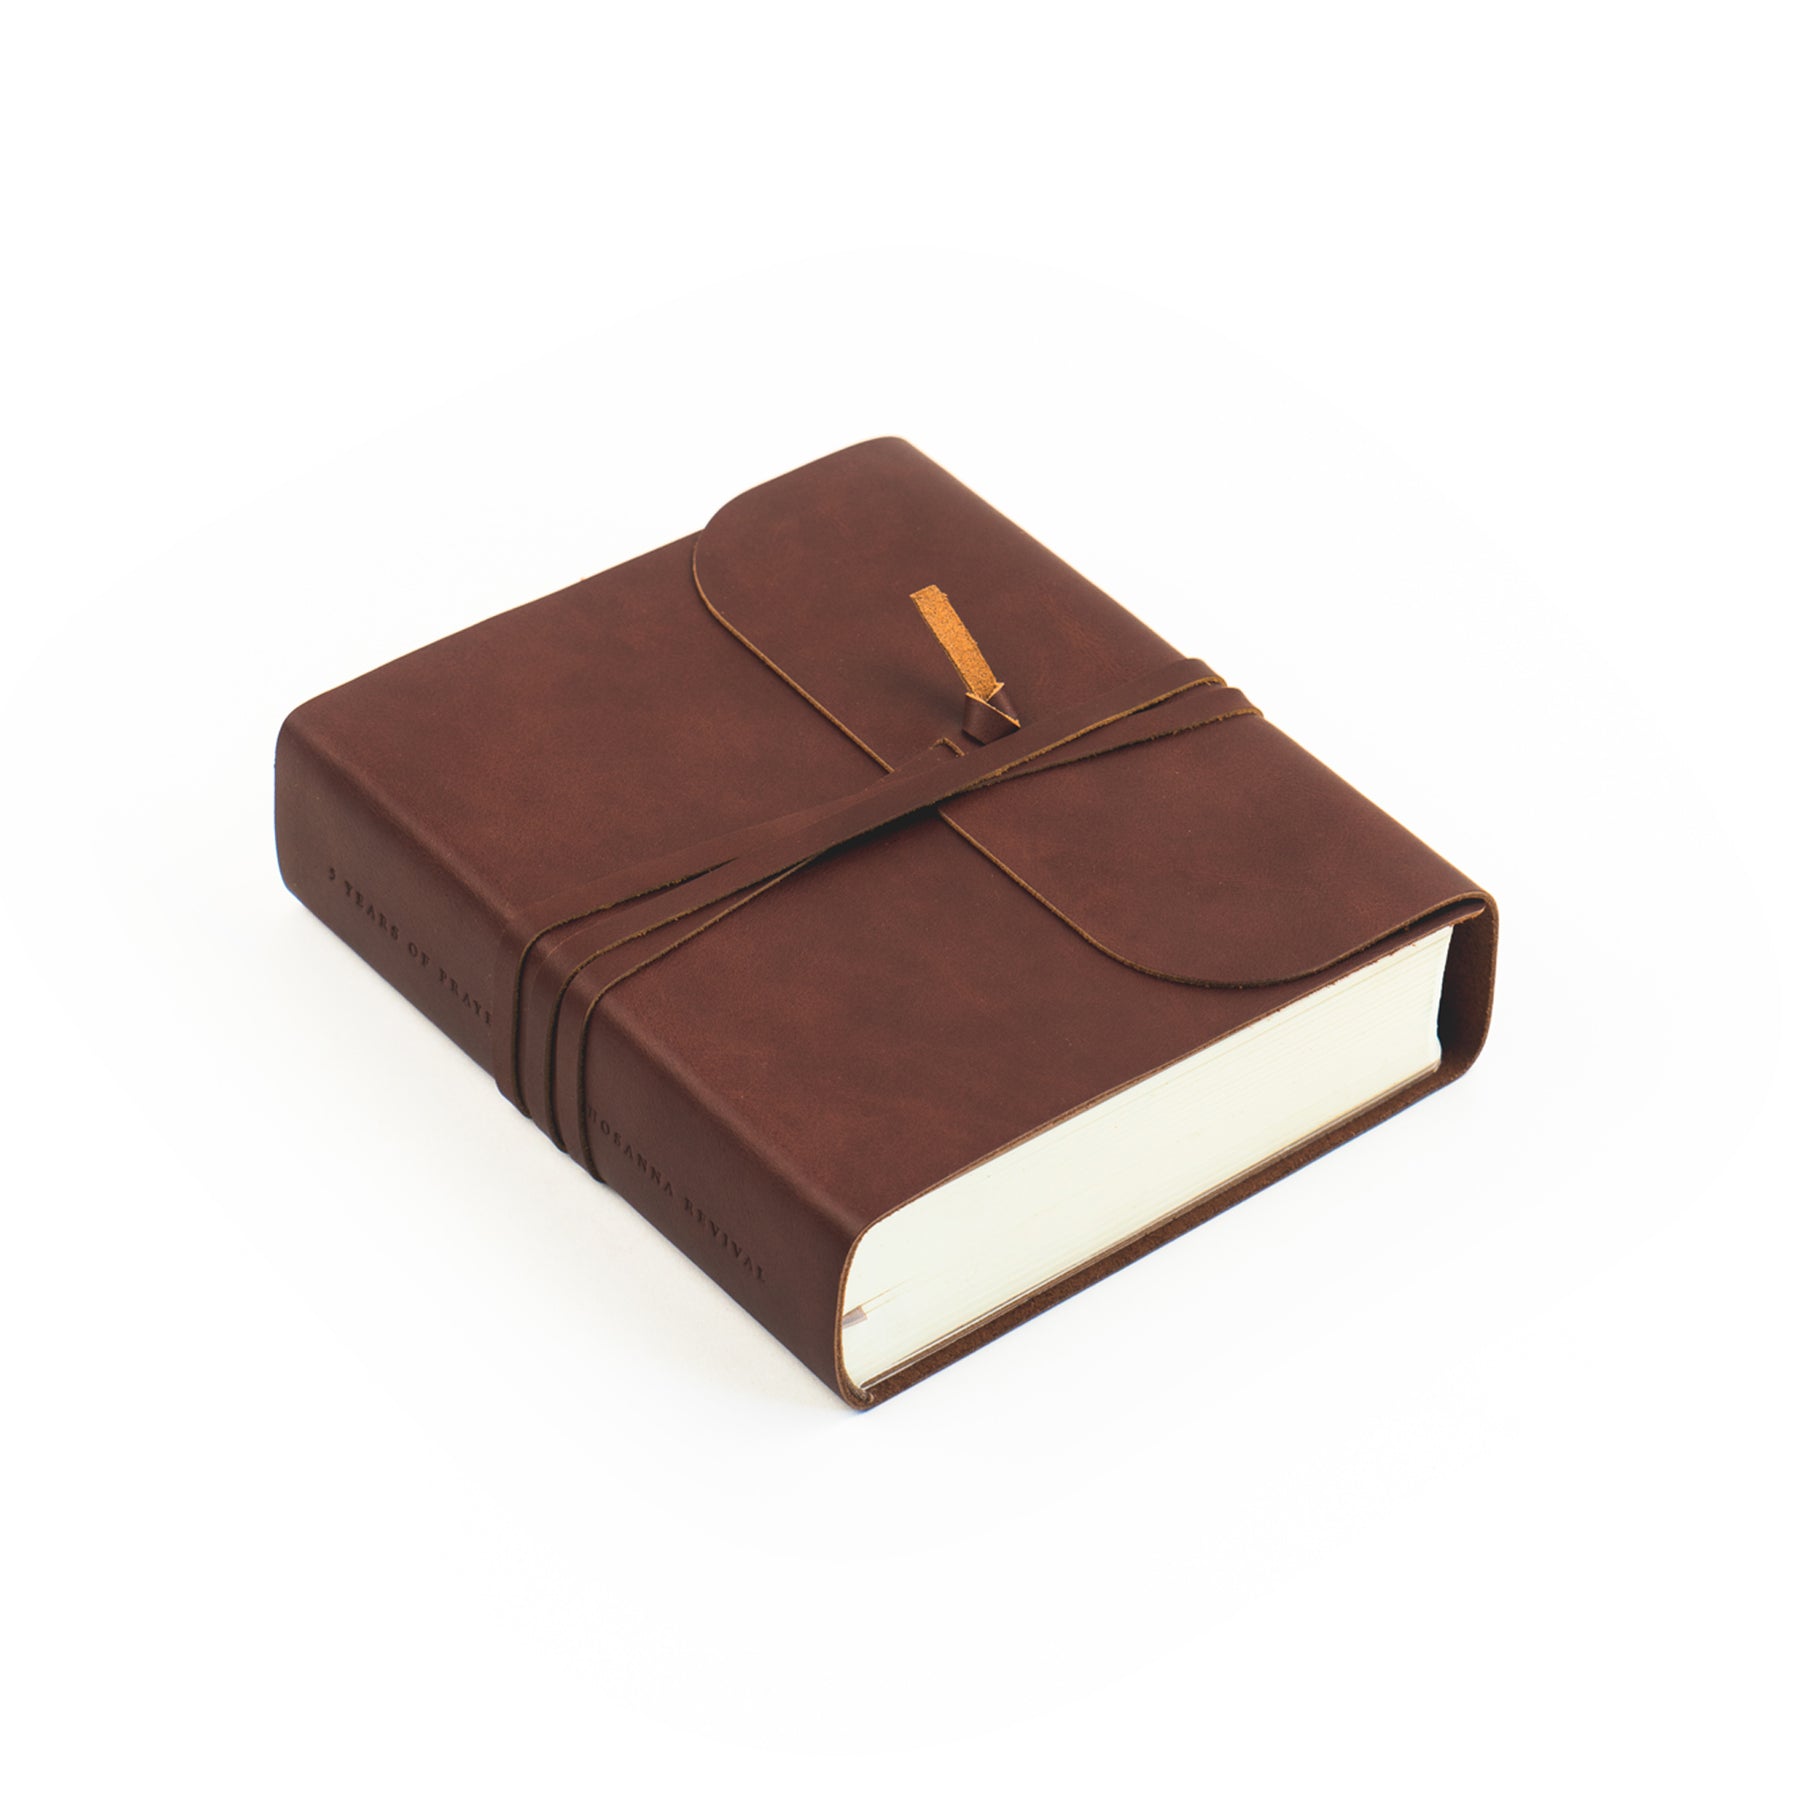 Pen+gear Simulated Leather Journal, Faith, 96 Pages